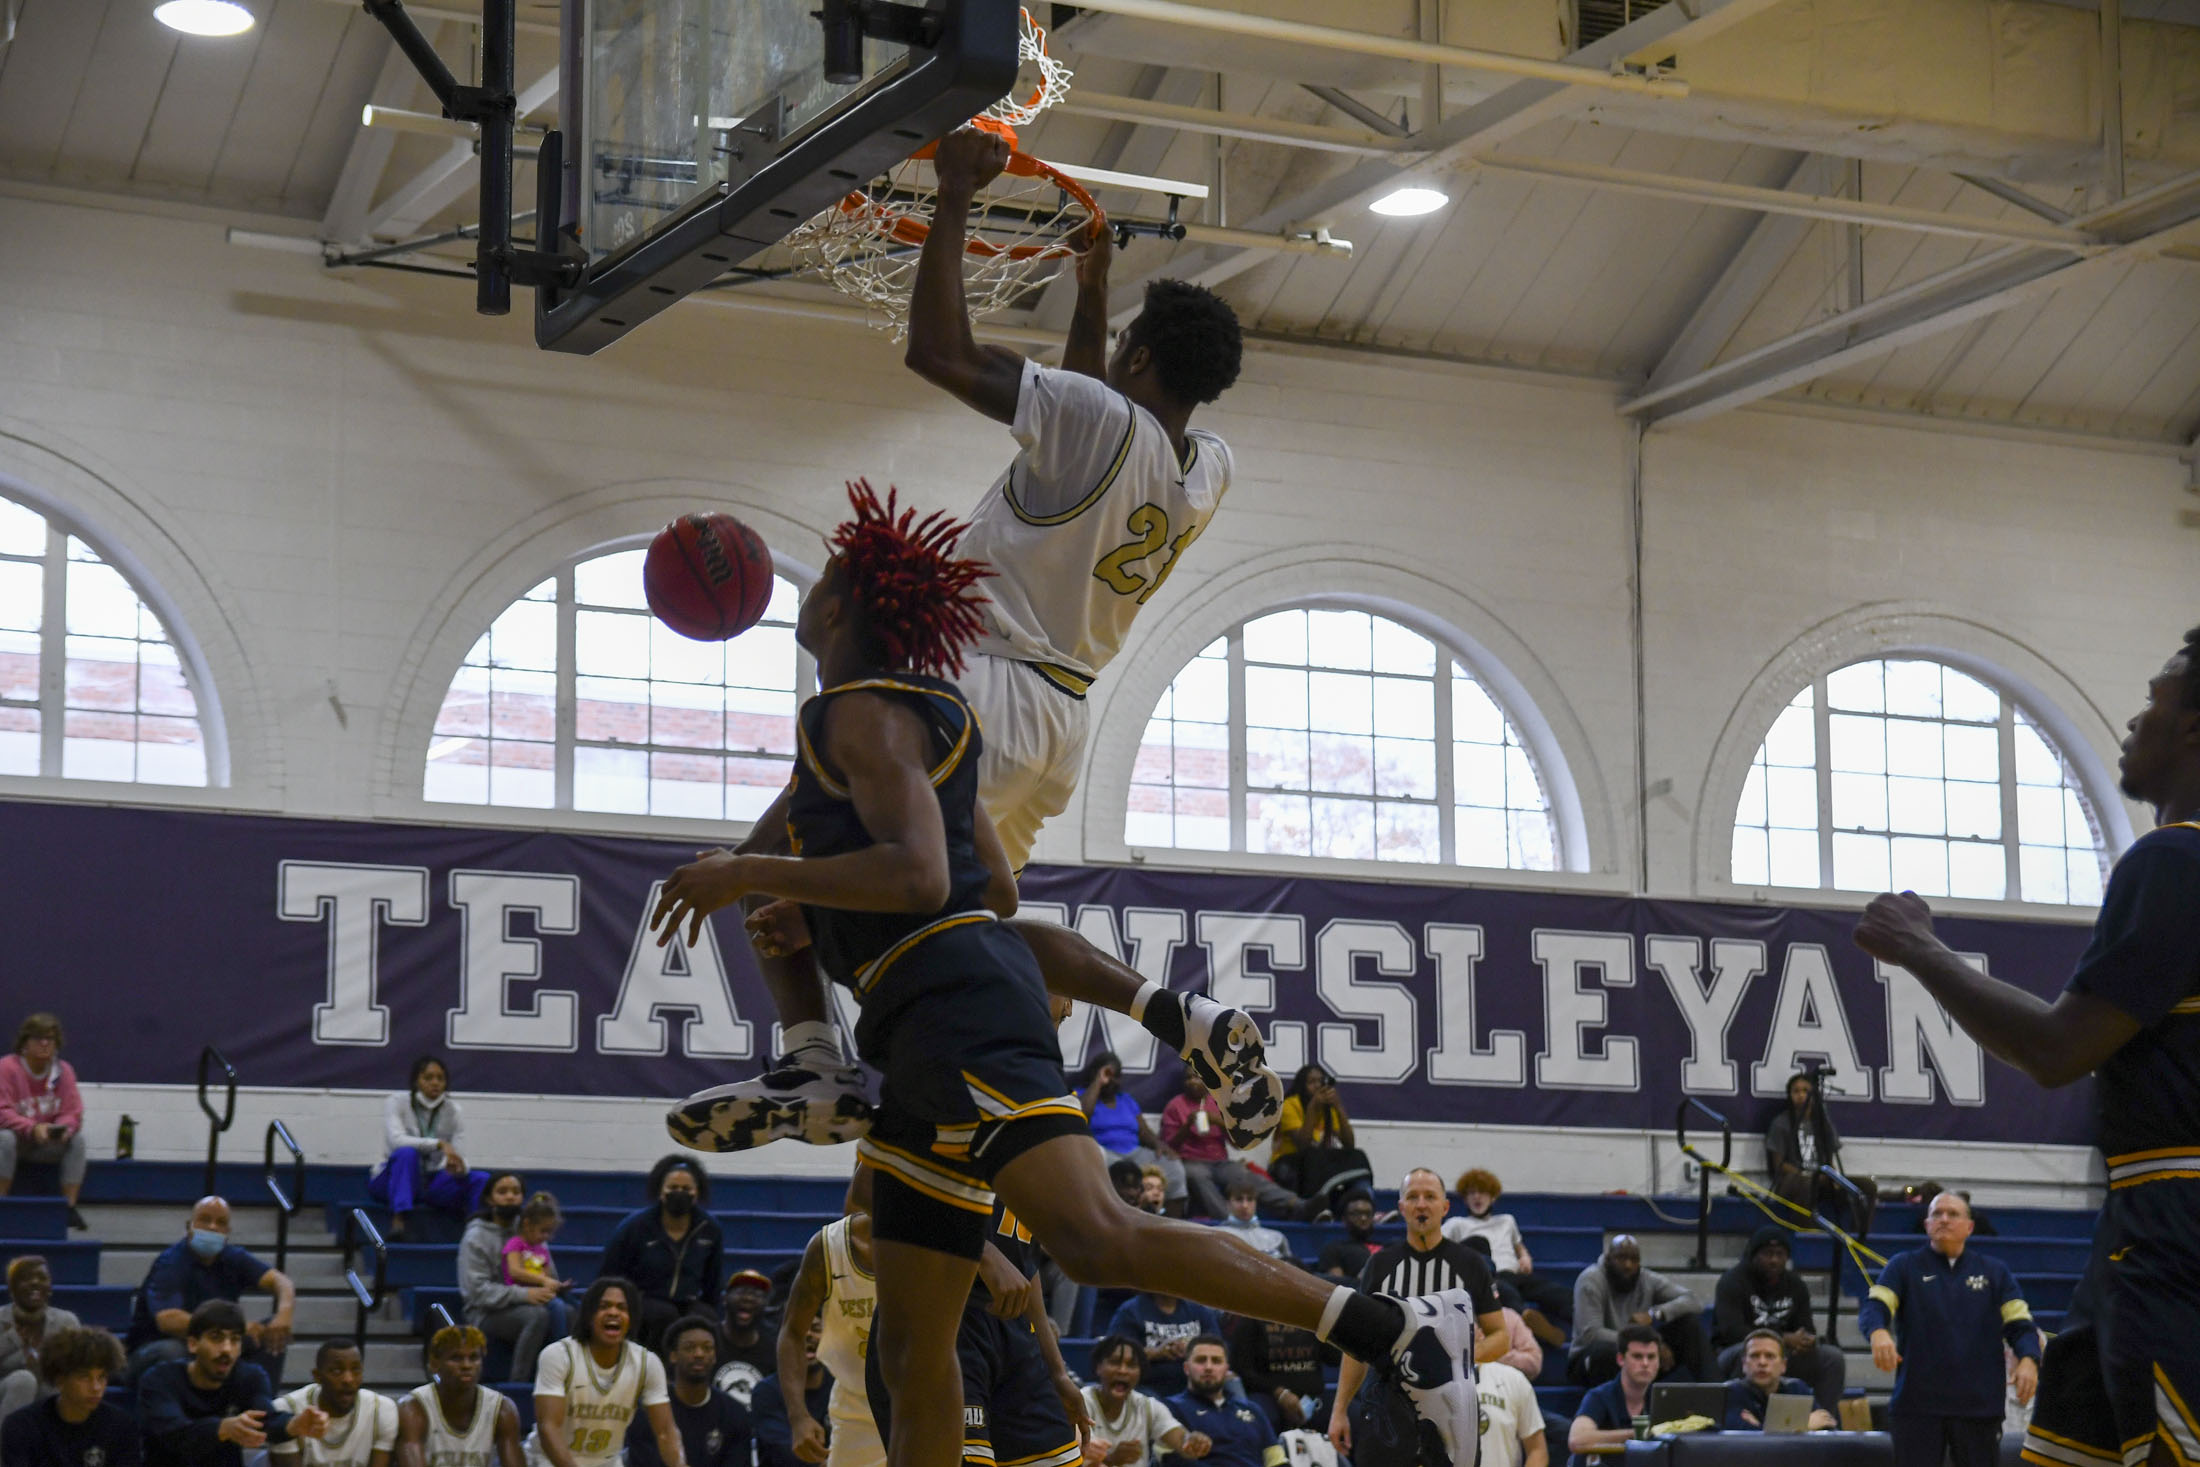 Dunk by Isaiah Lewis, courtesy of Dave Hilbert